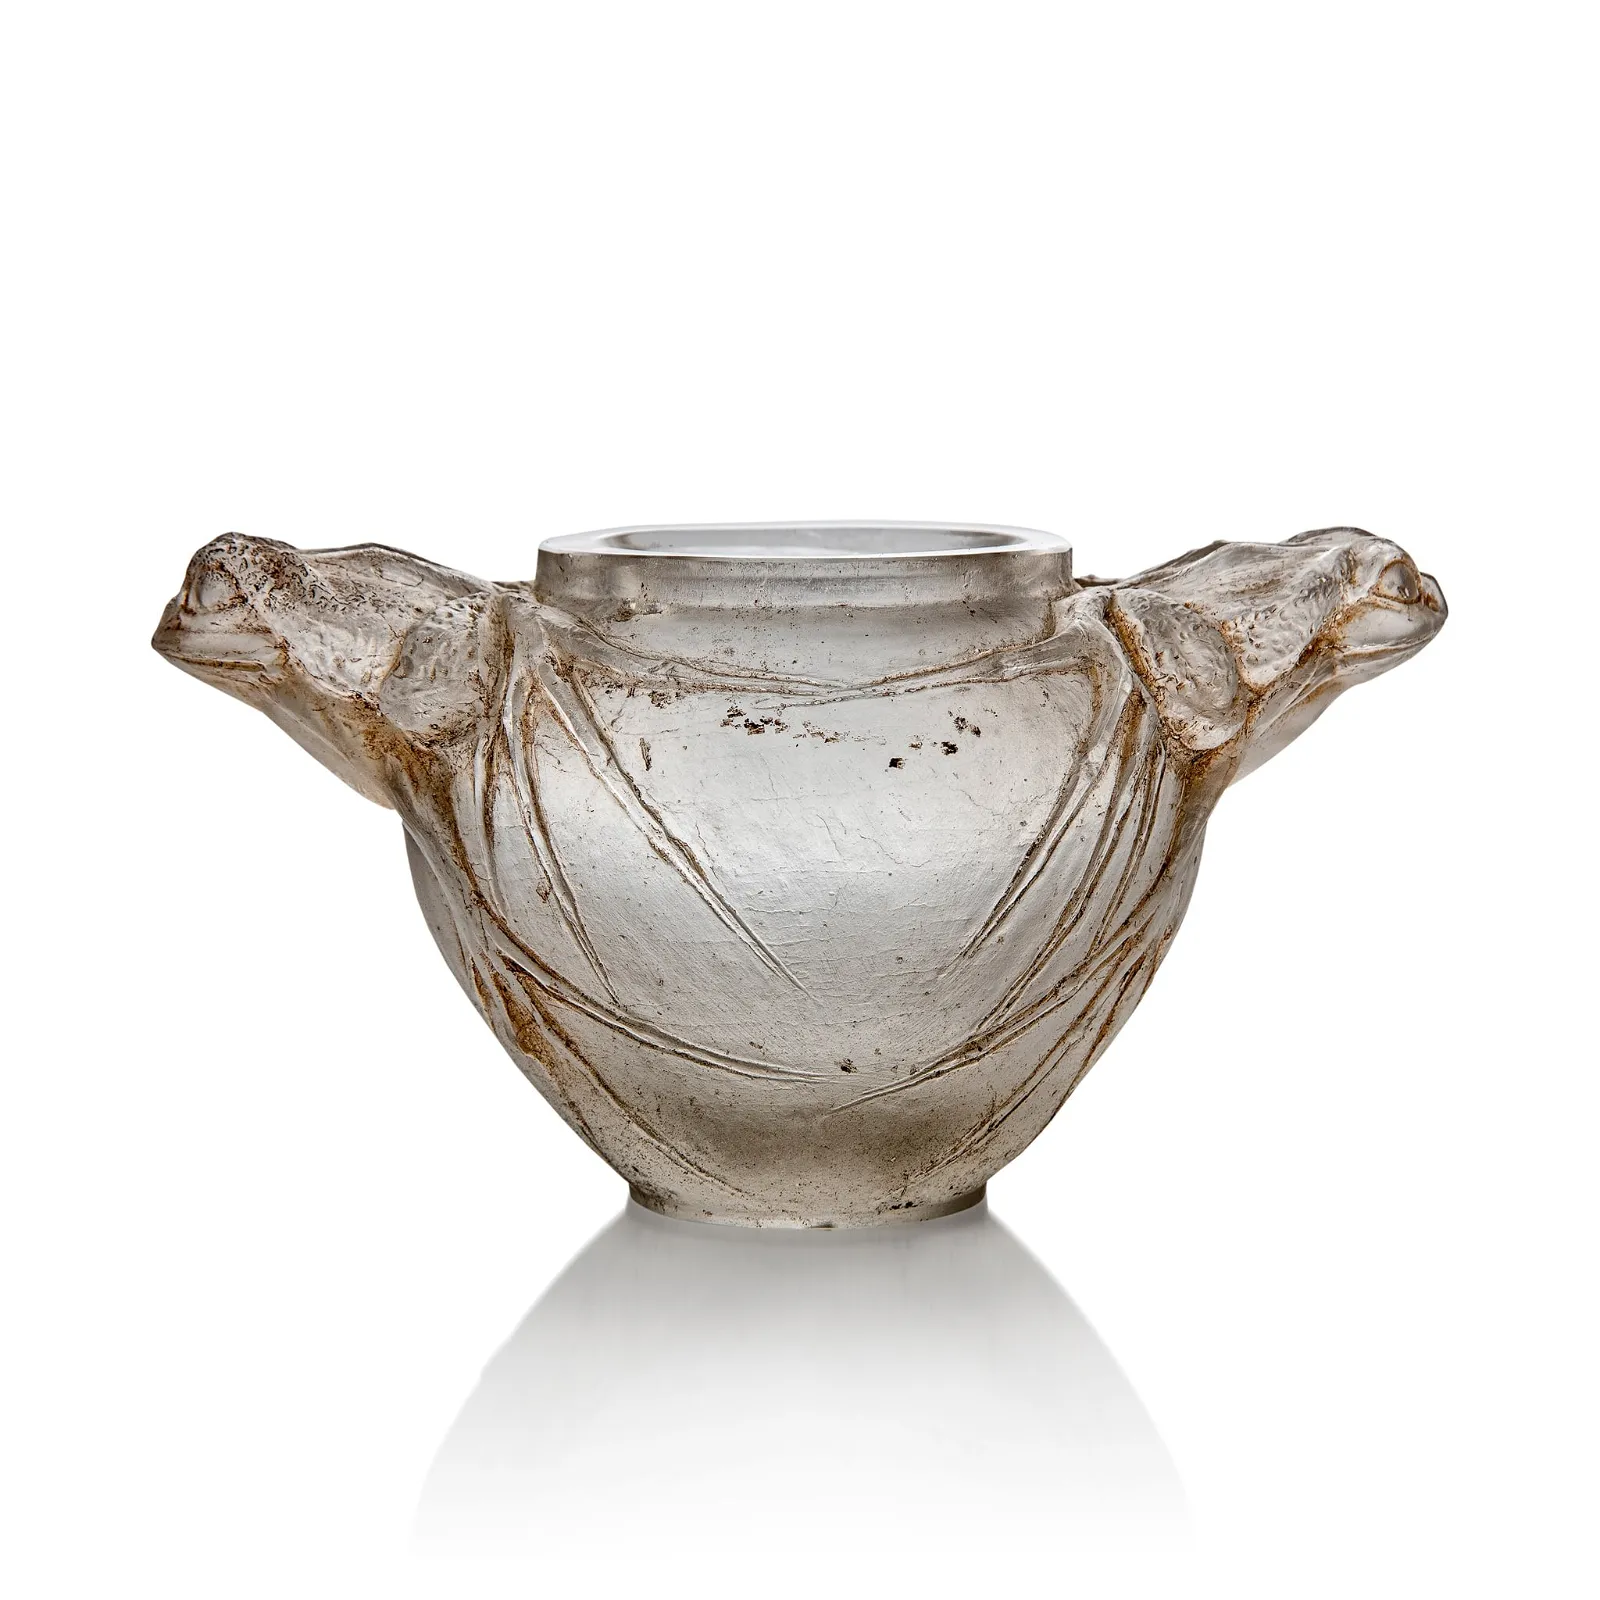 Six pieces of Lalique cire perdue glass presented at Lyon and Turnbull Oct. 26